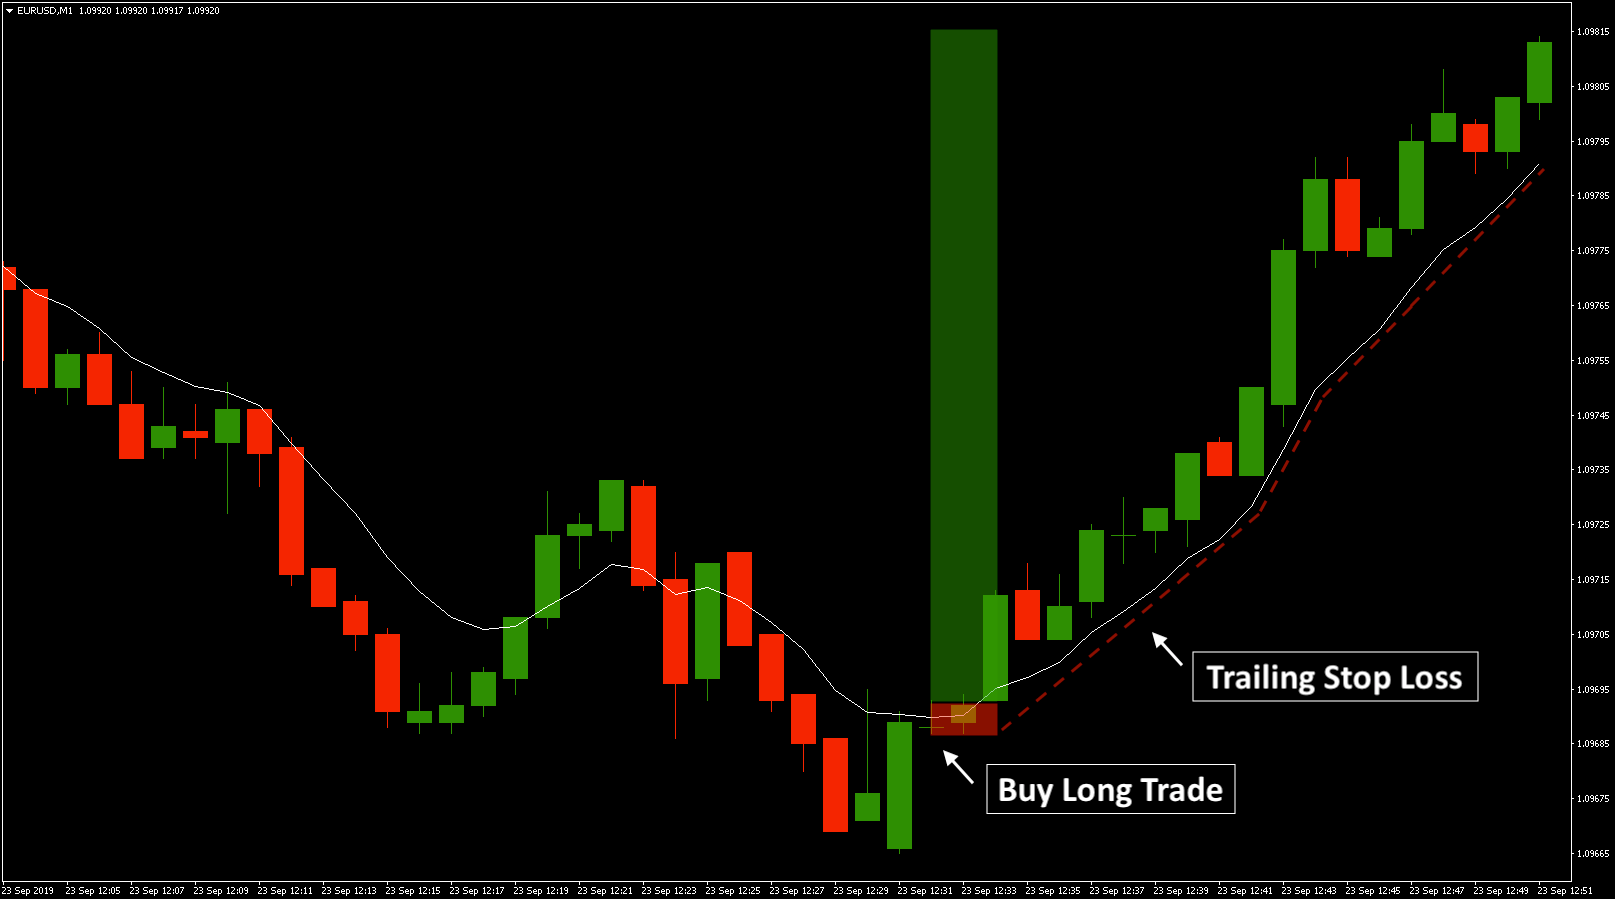 One Minute Candlestick Strategy Buy Long Setup (Trailing Stop Loss)